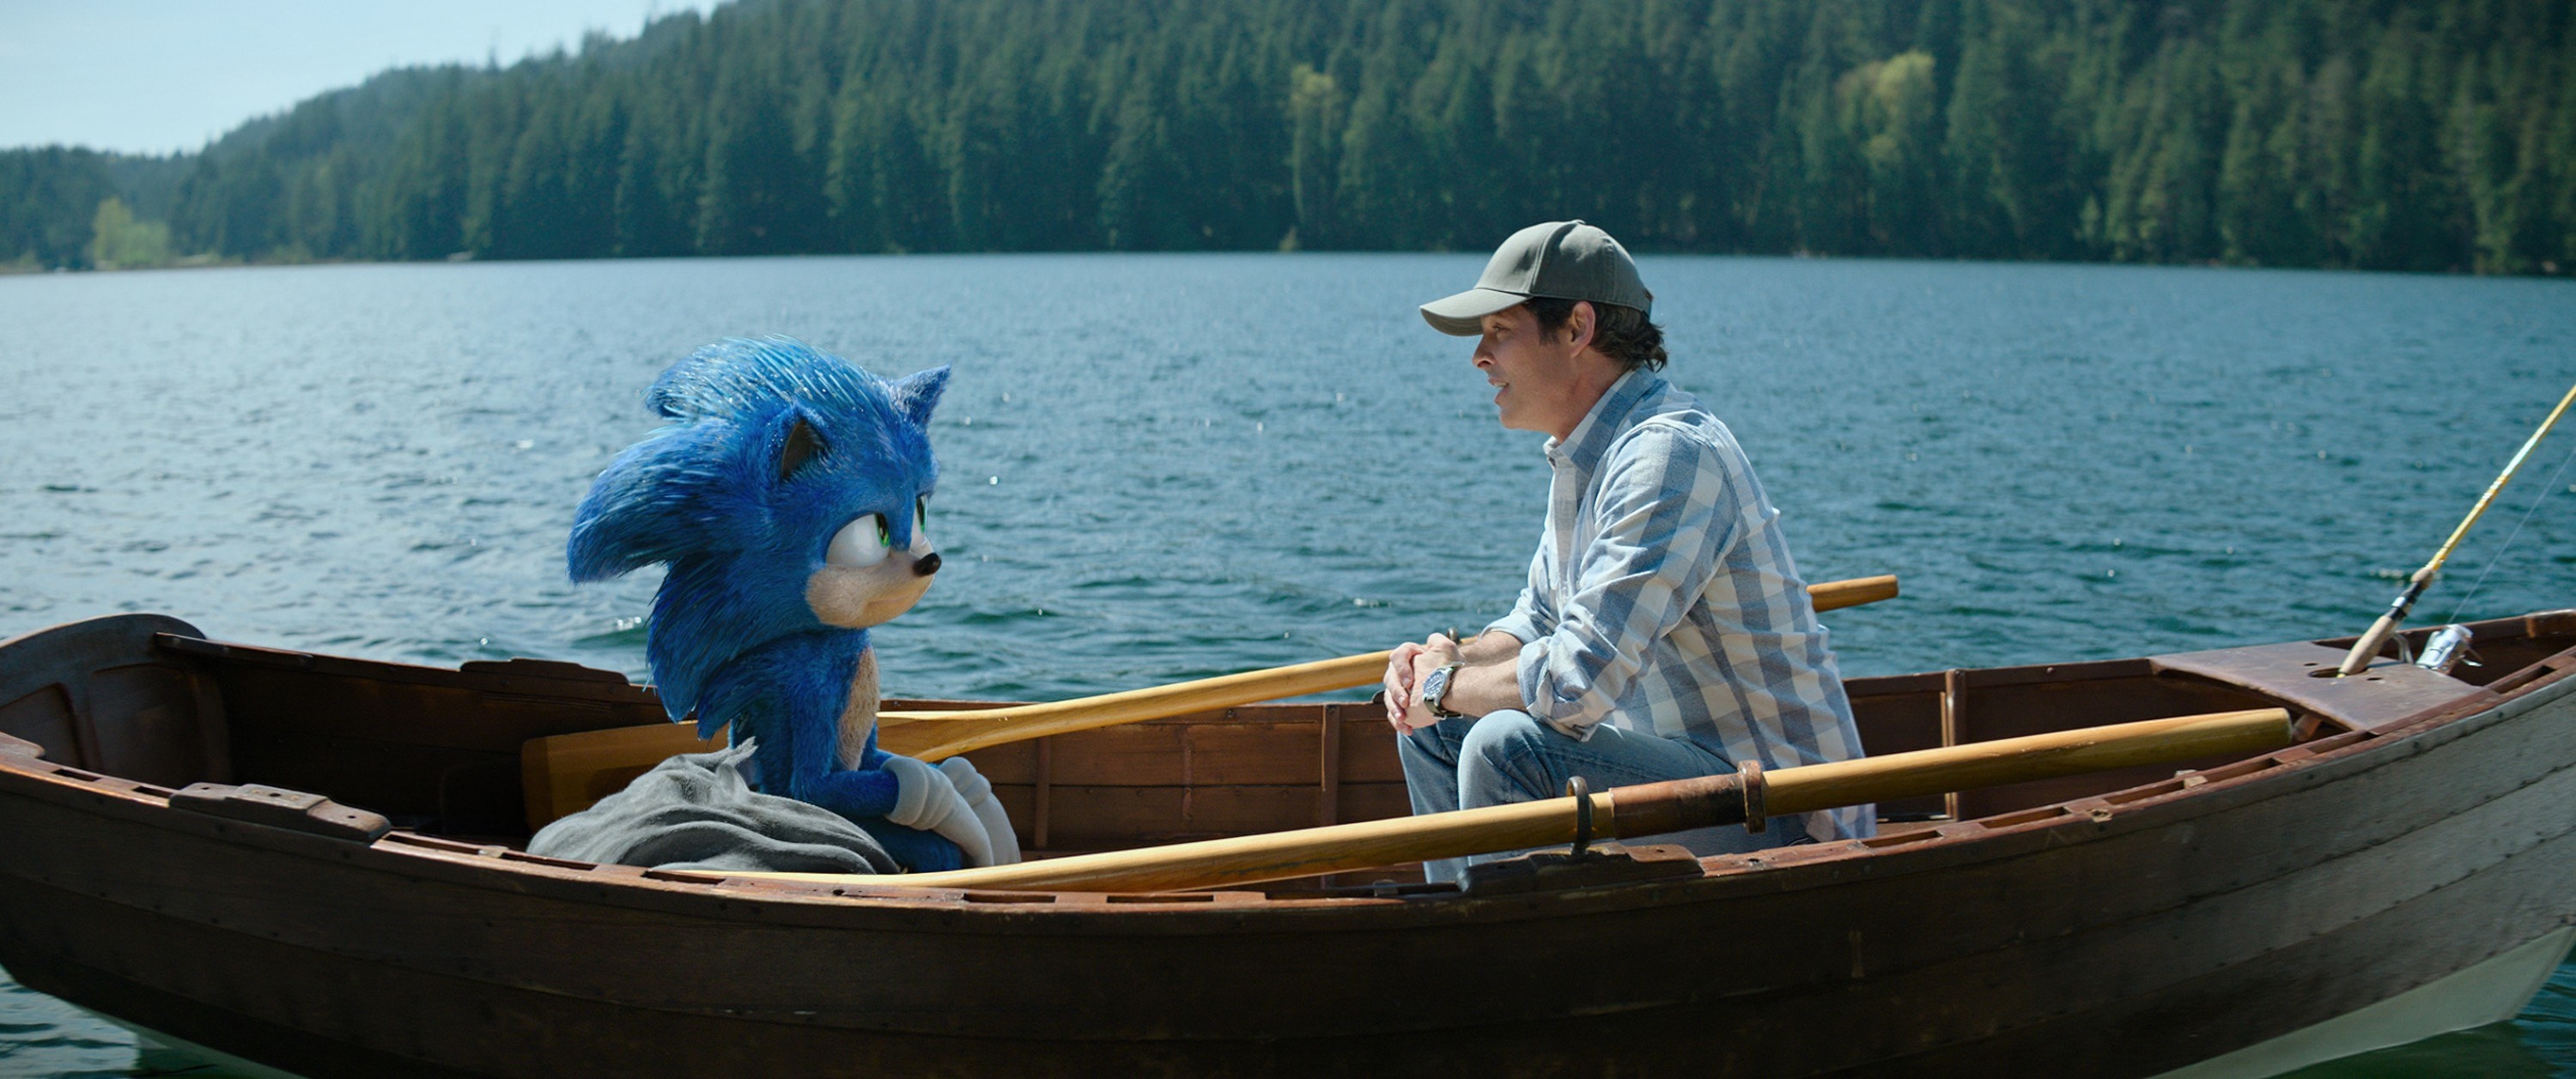 Sonic sits in a boat with James Marsden